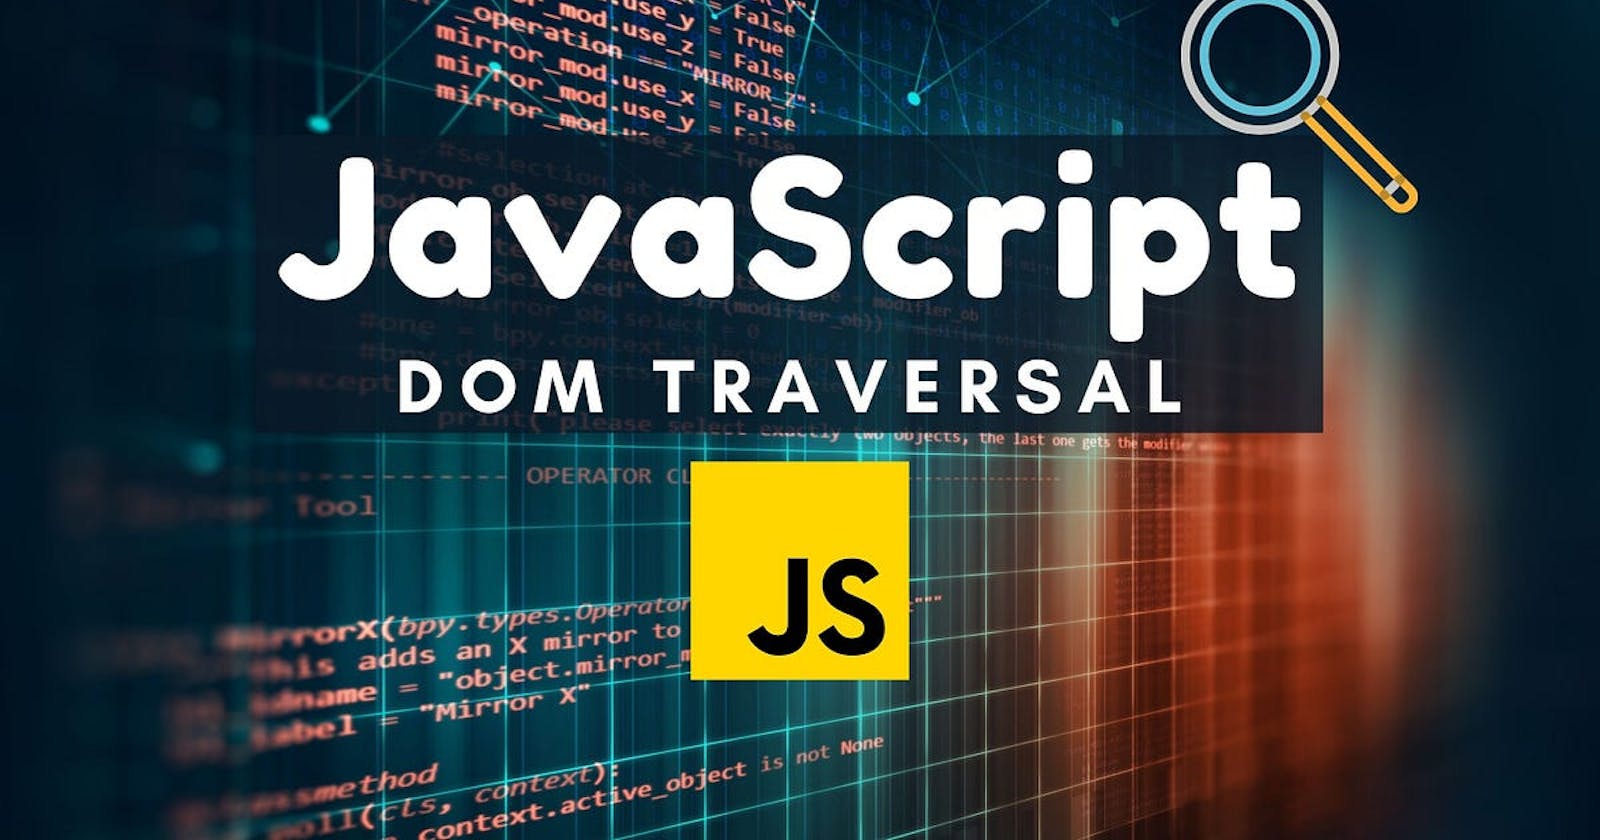 Traversing The DOM With JavaScript